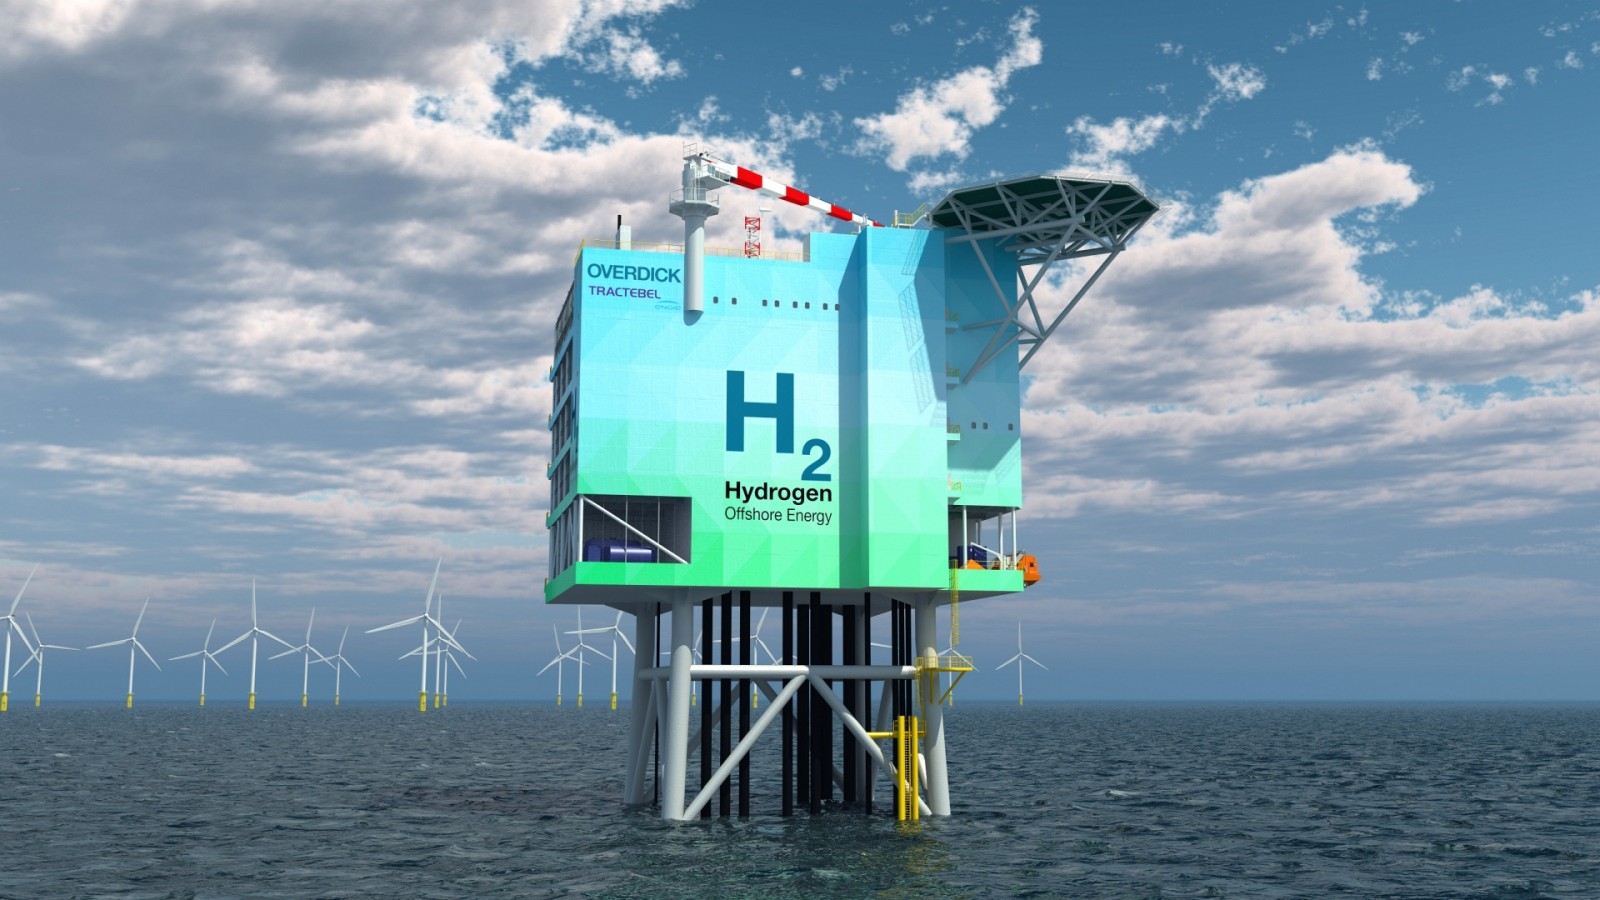 An image rendering Tractebel hydrogen platform at an offshore wind farm